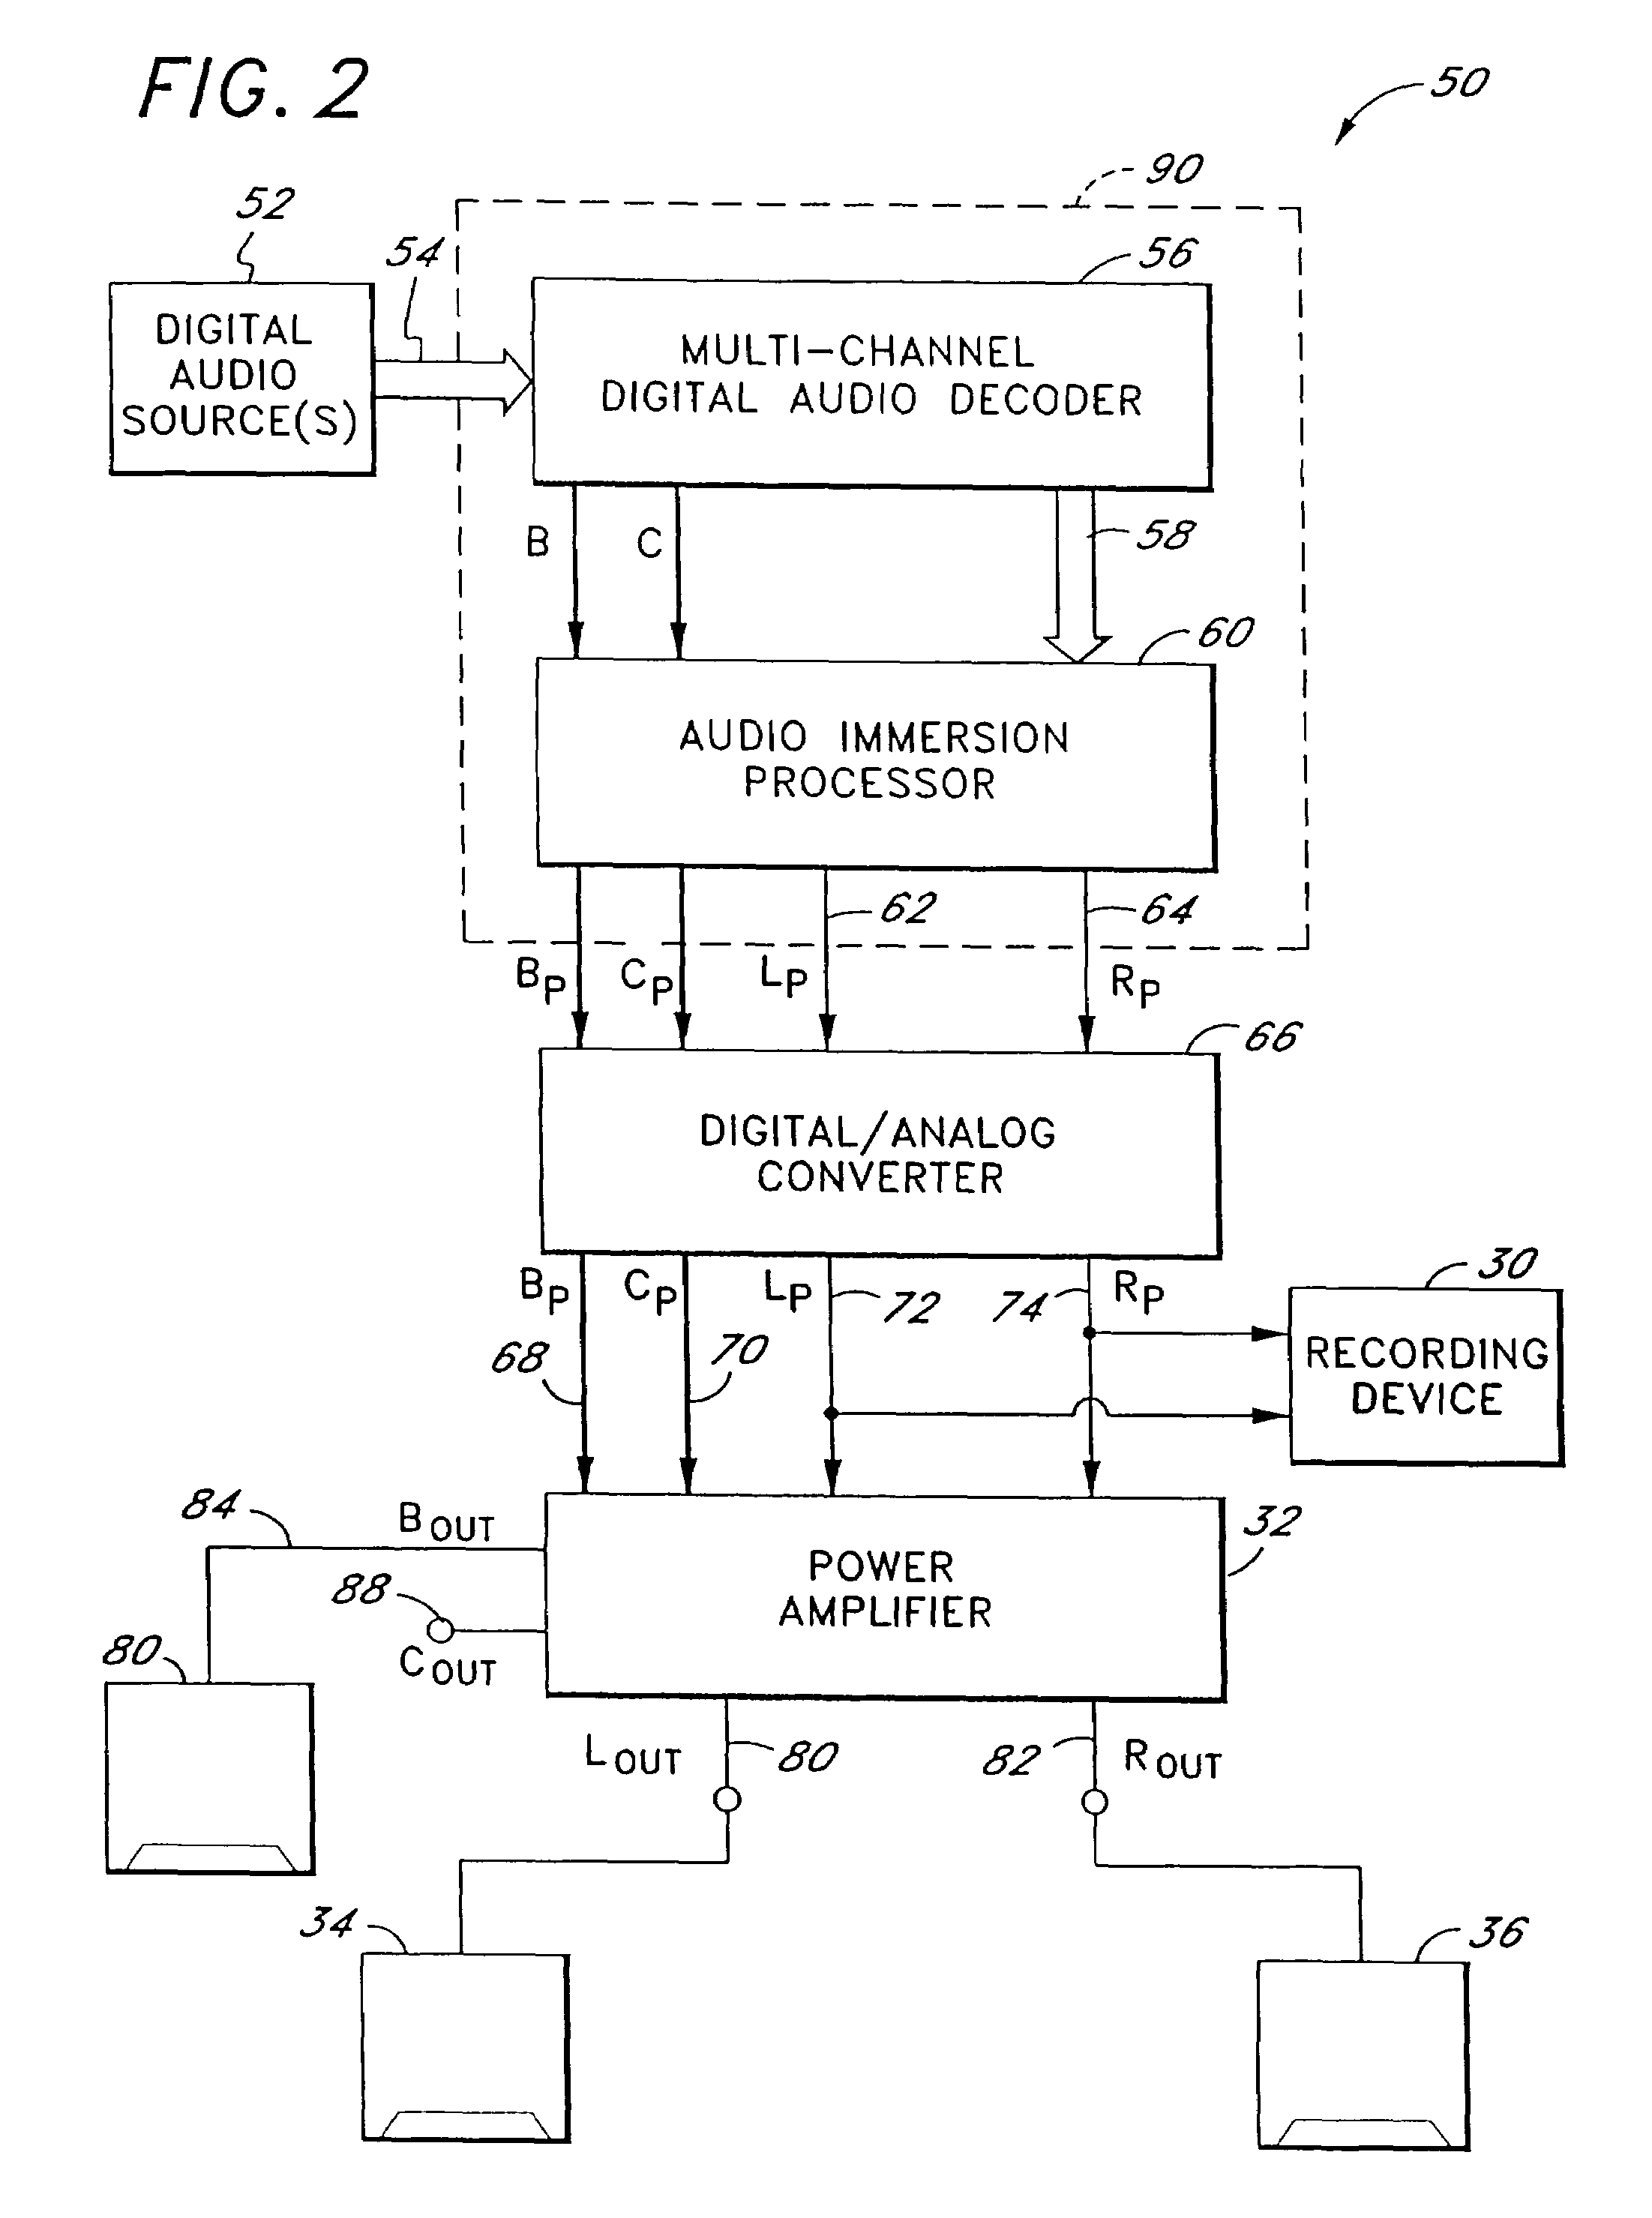 Multi-channel audio enhancement system for use in recording playback and methods for providing same